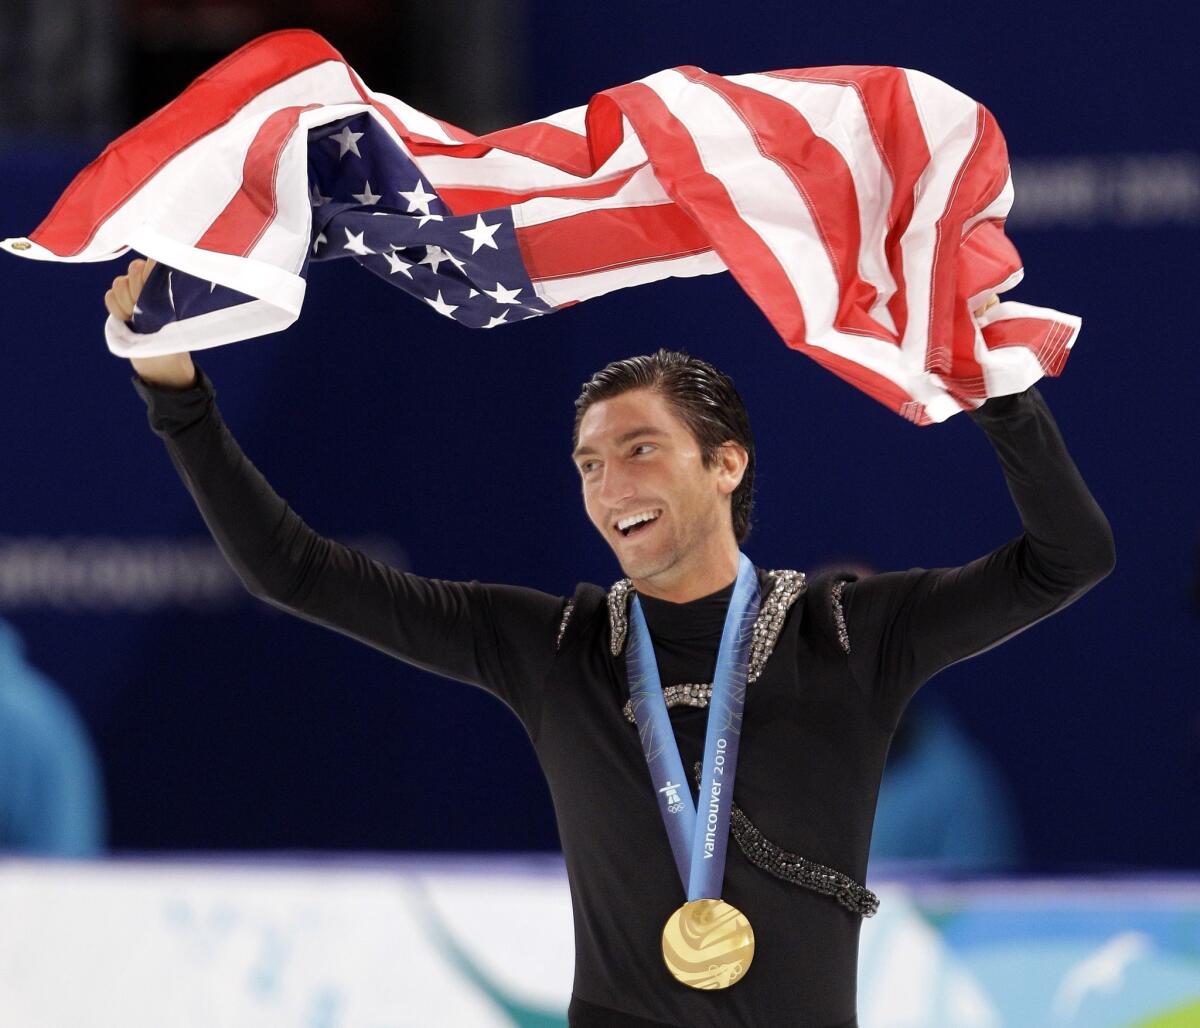 Evan Lysacek, shown after winning Olympic gold in 2010, will not compete at the Skate America Grand Prix event.